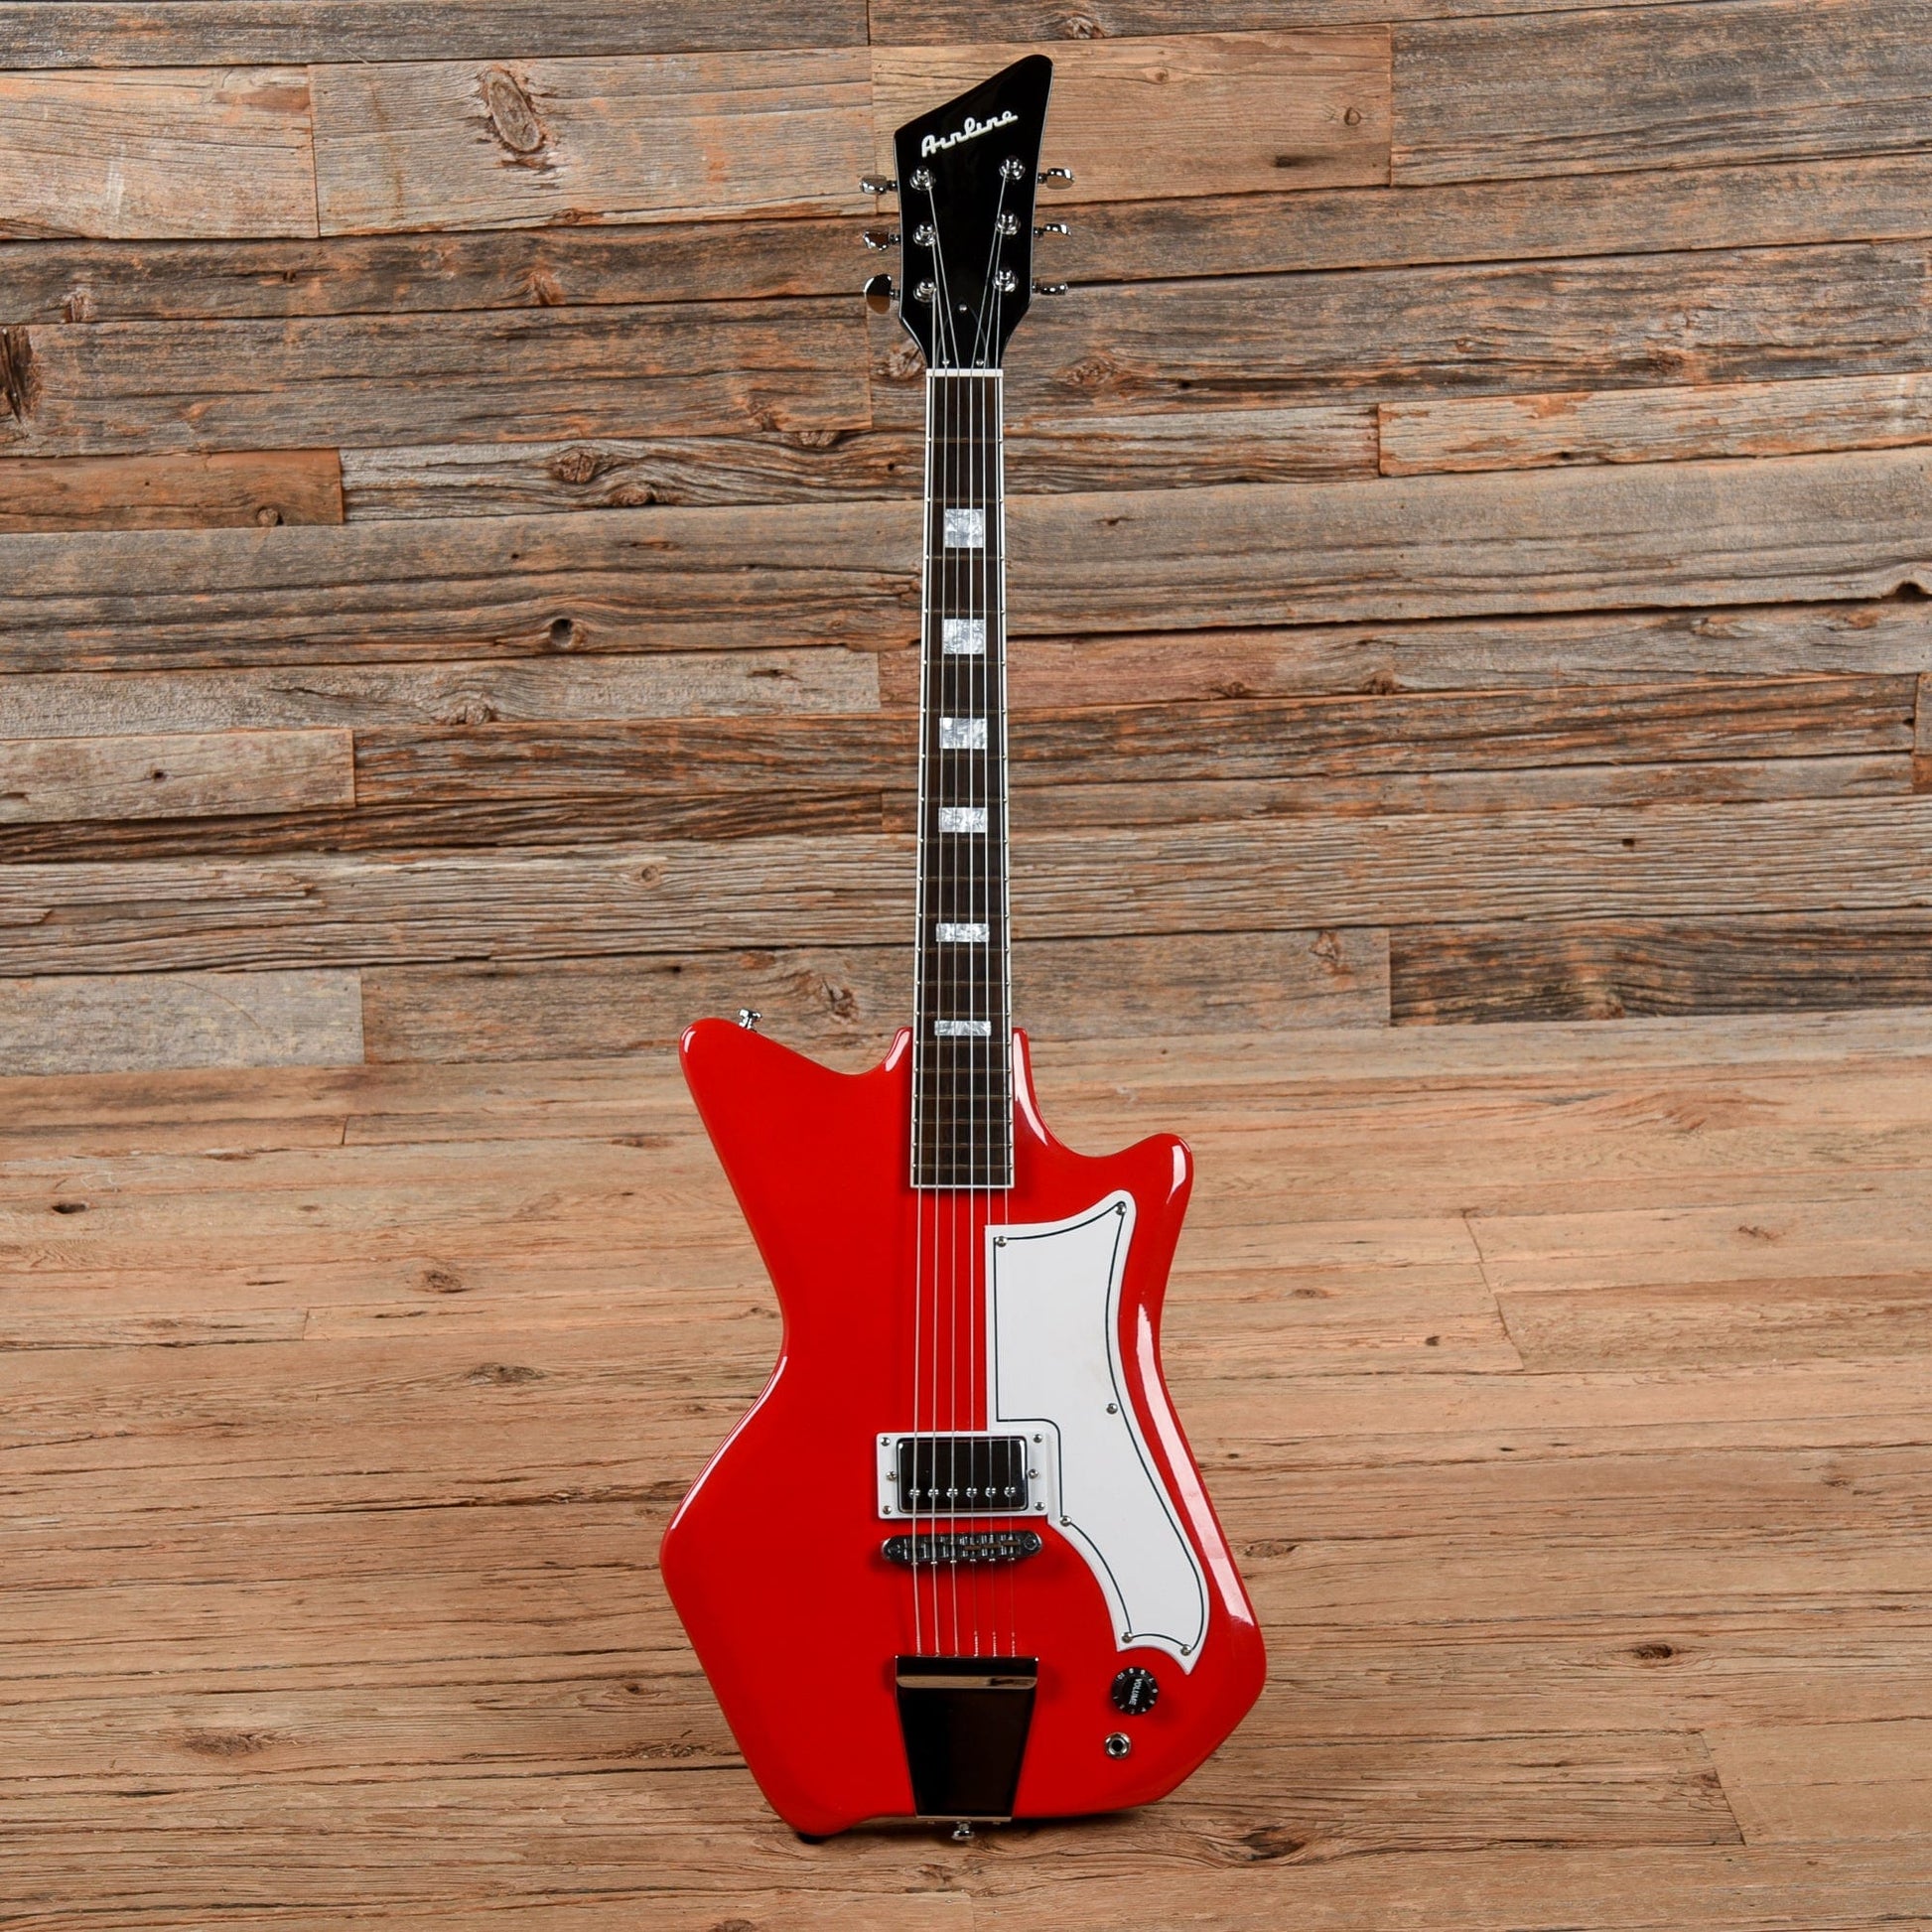 Eastwood Airline Jetsons Jr Red Electric Guitars / Solid Body